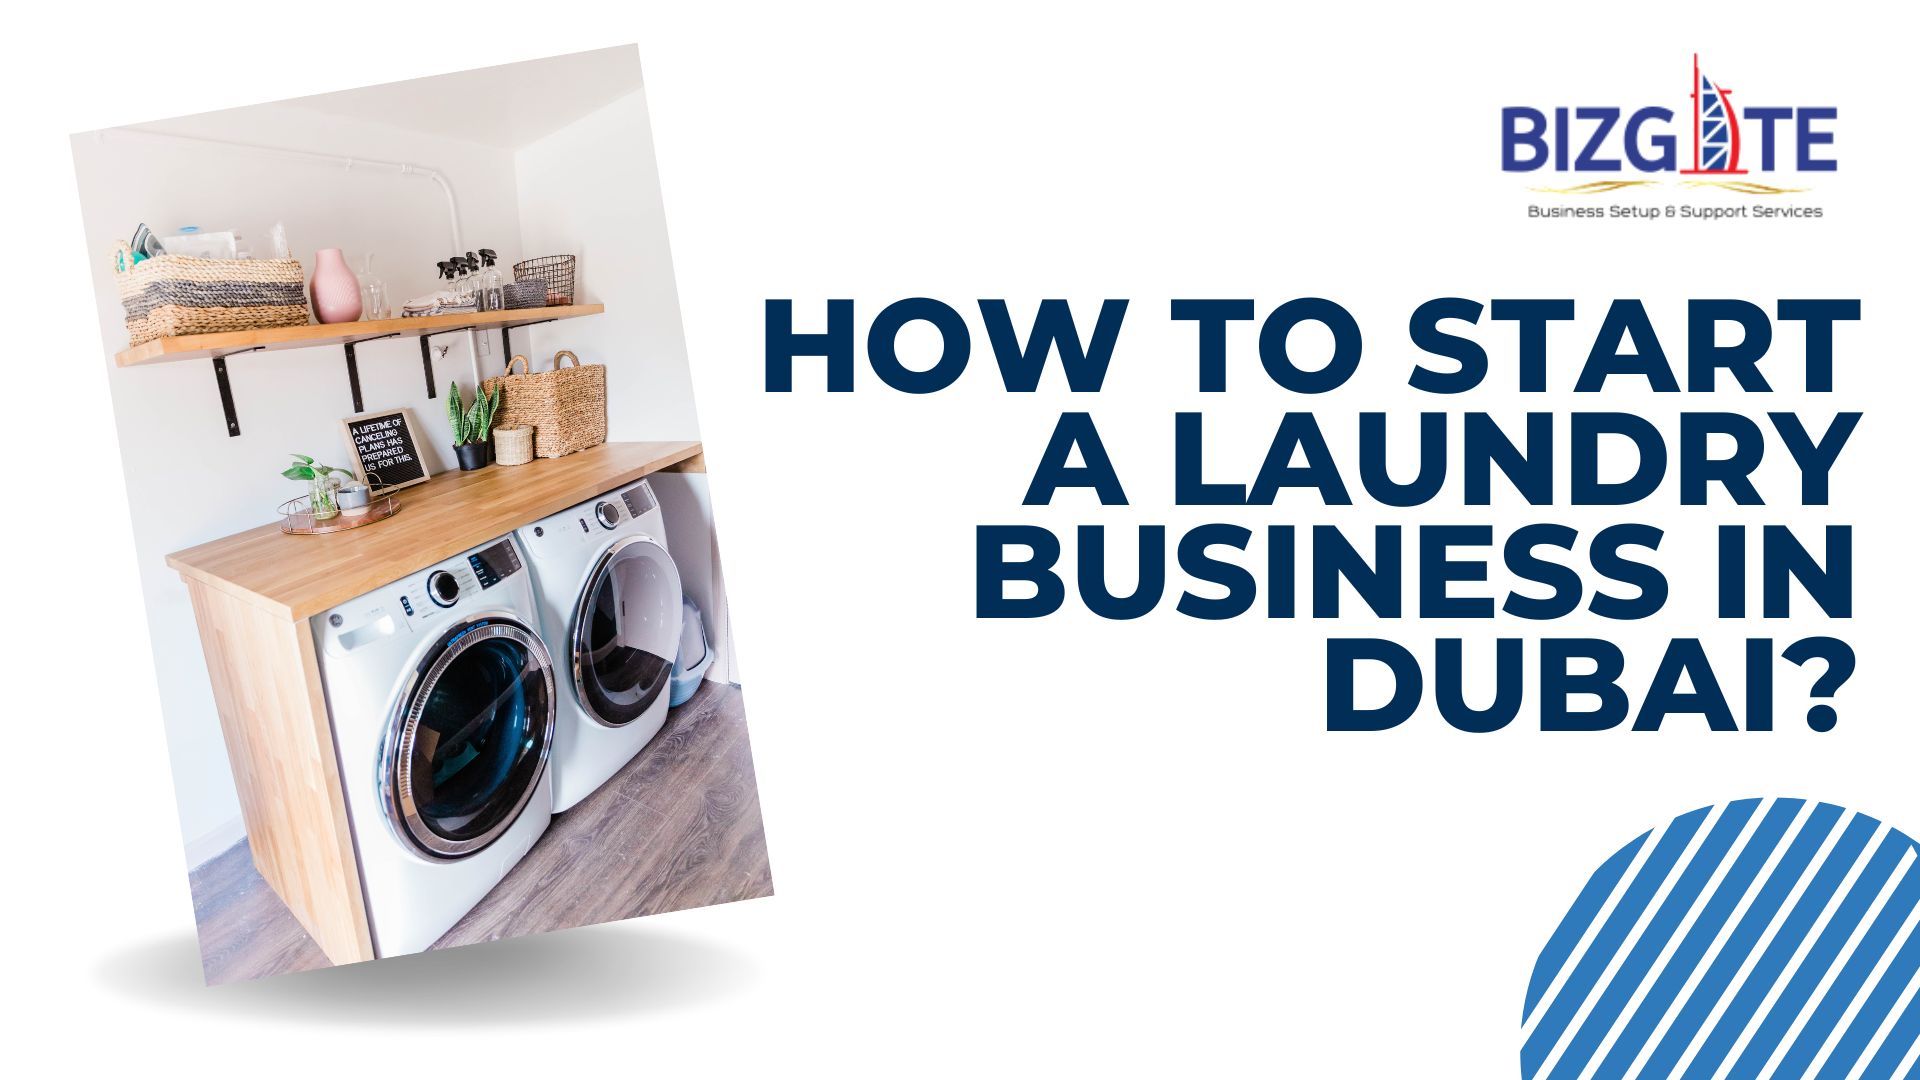 You are currently viewing How to start a laundry business in Dubai? | Business Setup in Dubai